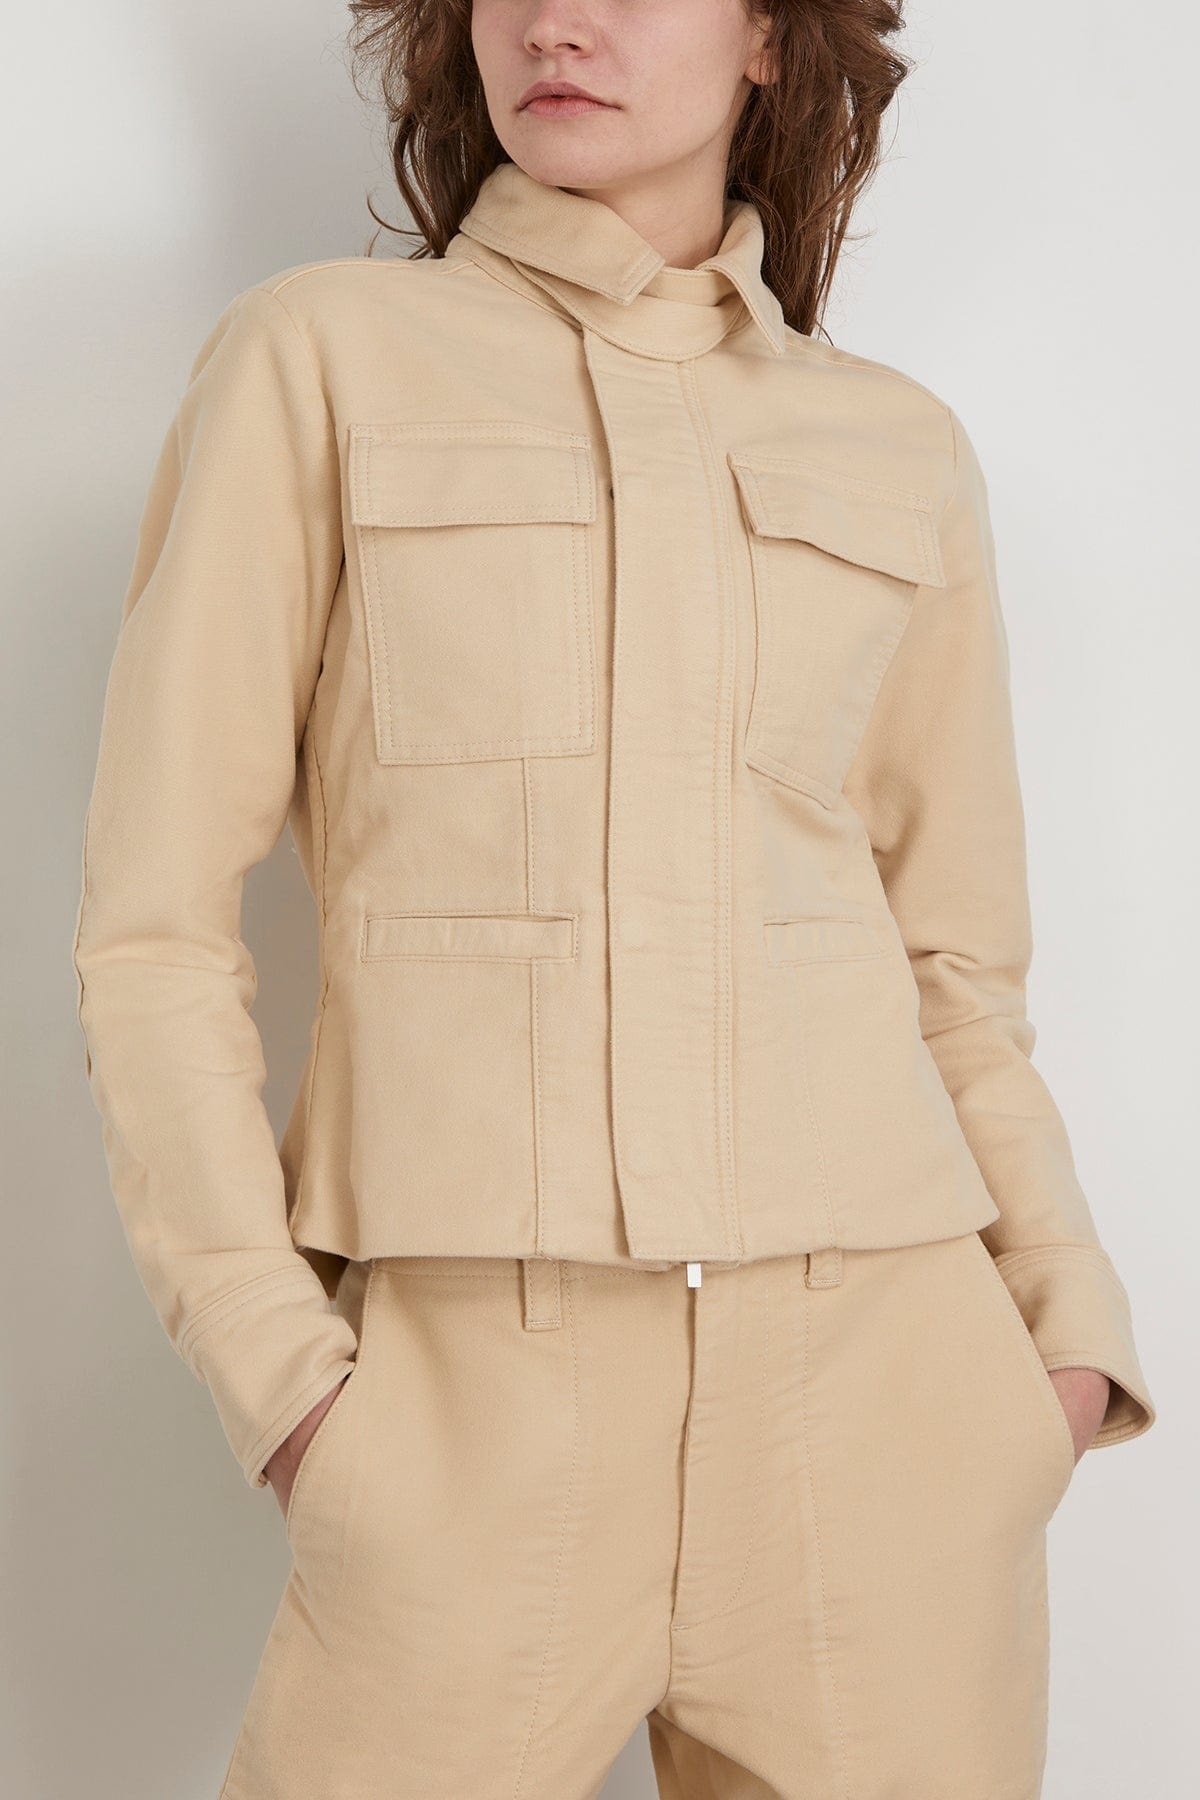 Ava Jacket in Canvas - 3